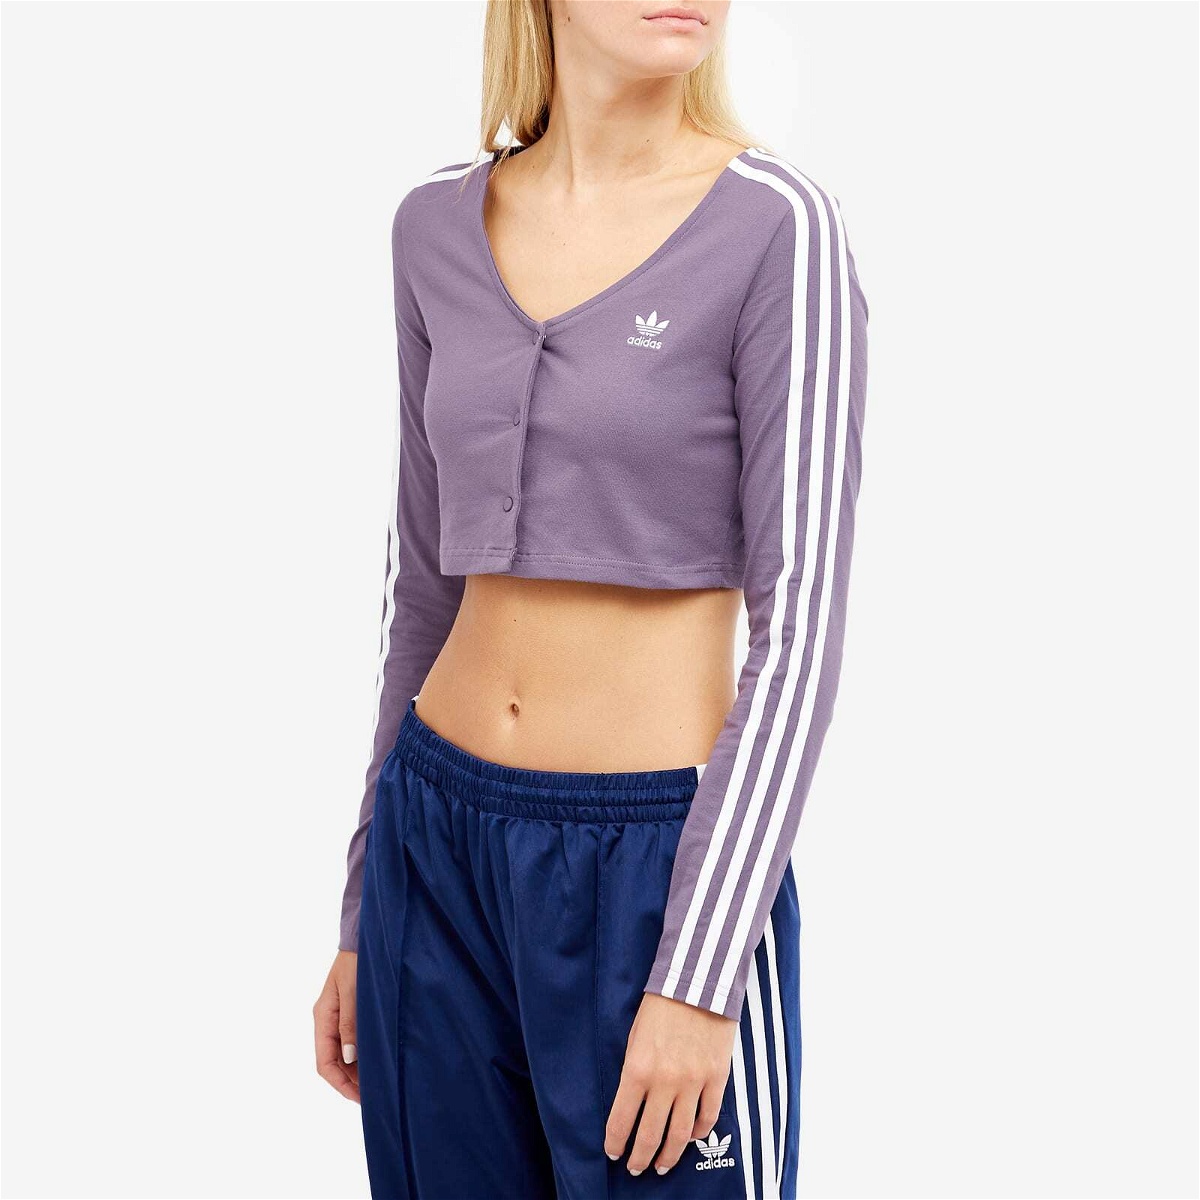 T-Shirt Button Adidas Long adidas Shadow in Violet Women\'s Sleeve